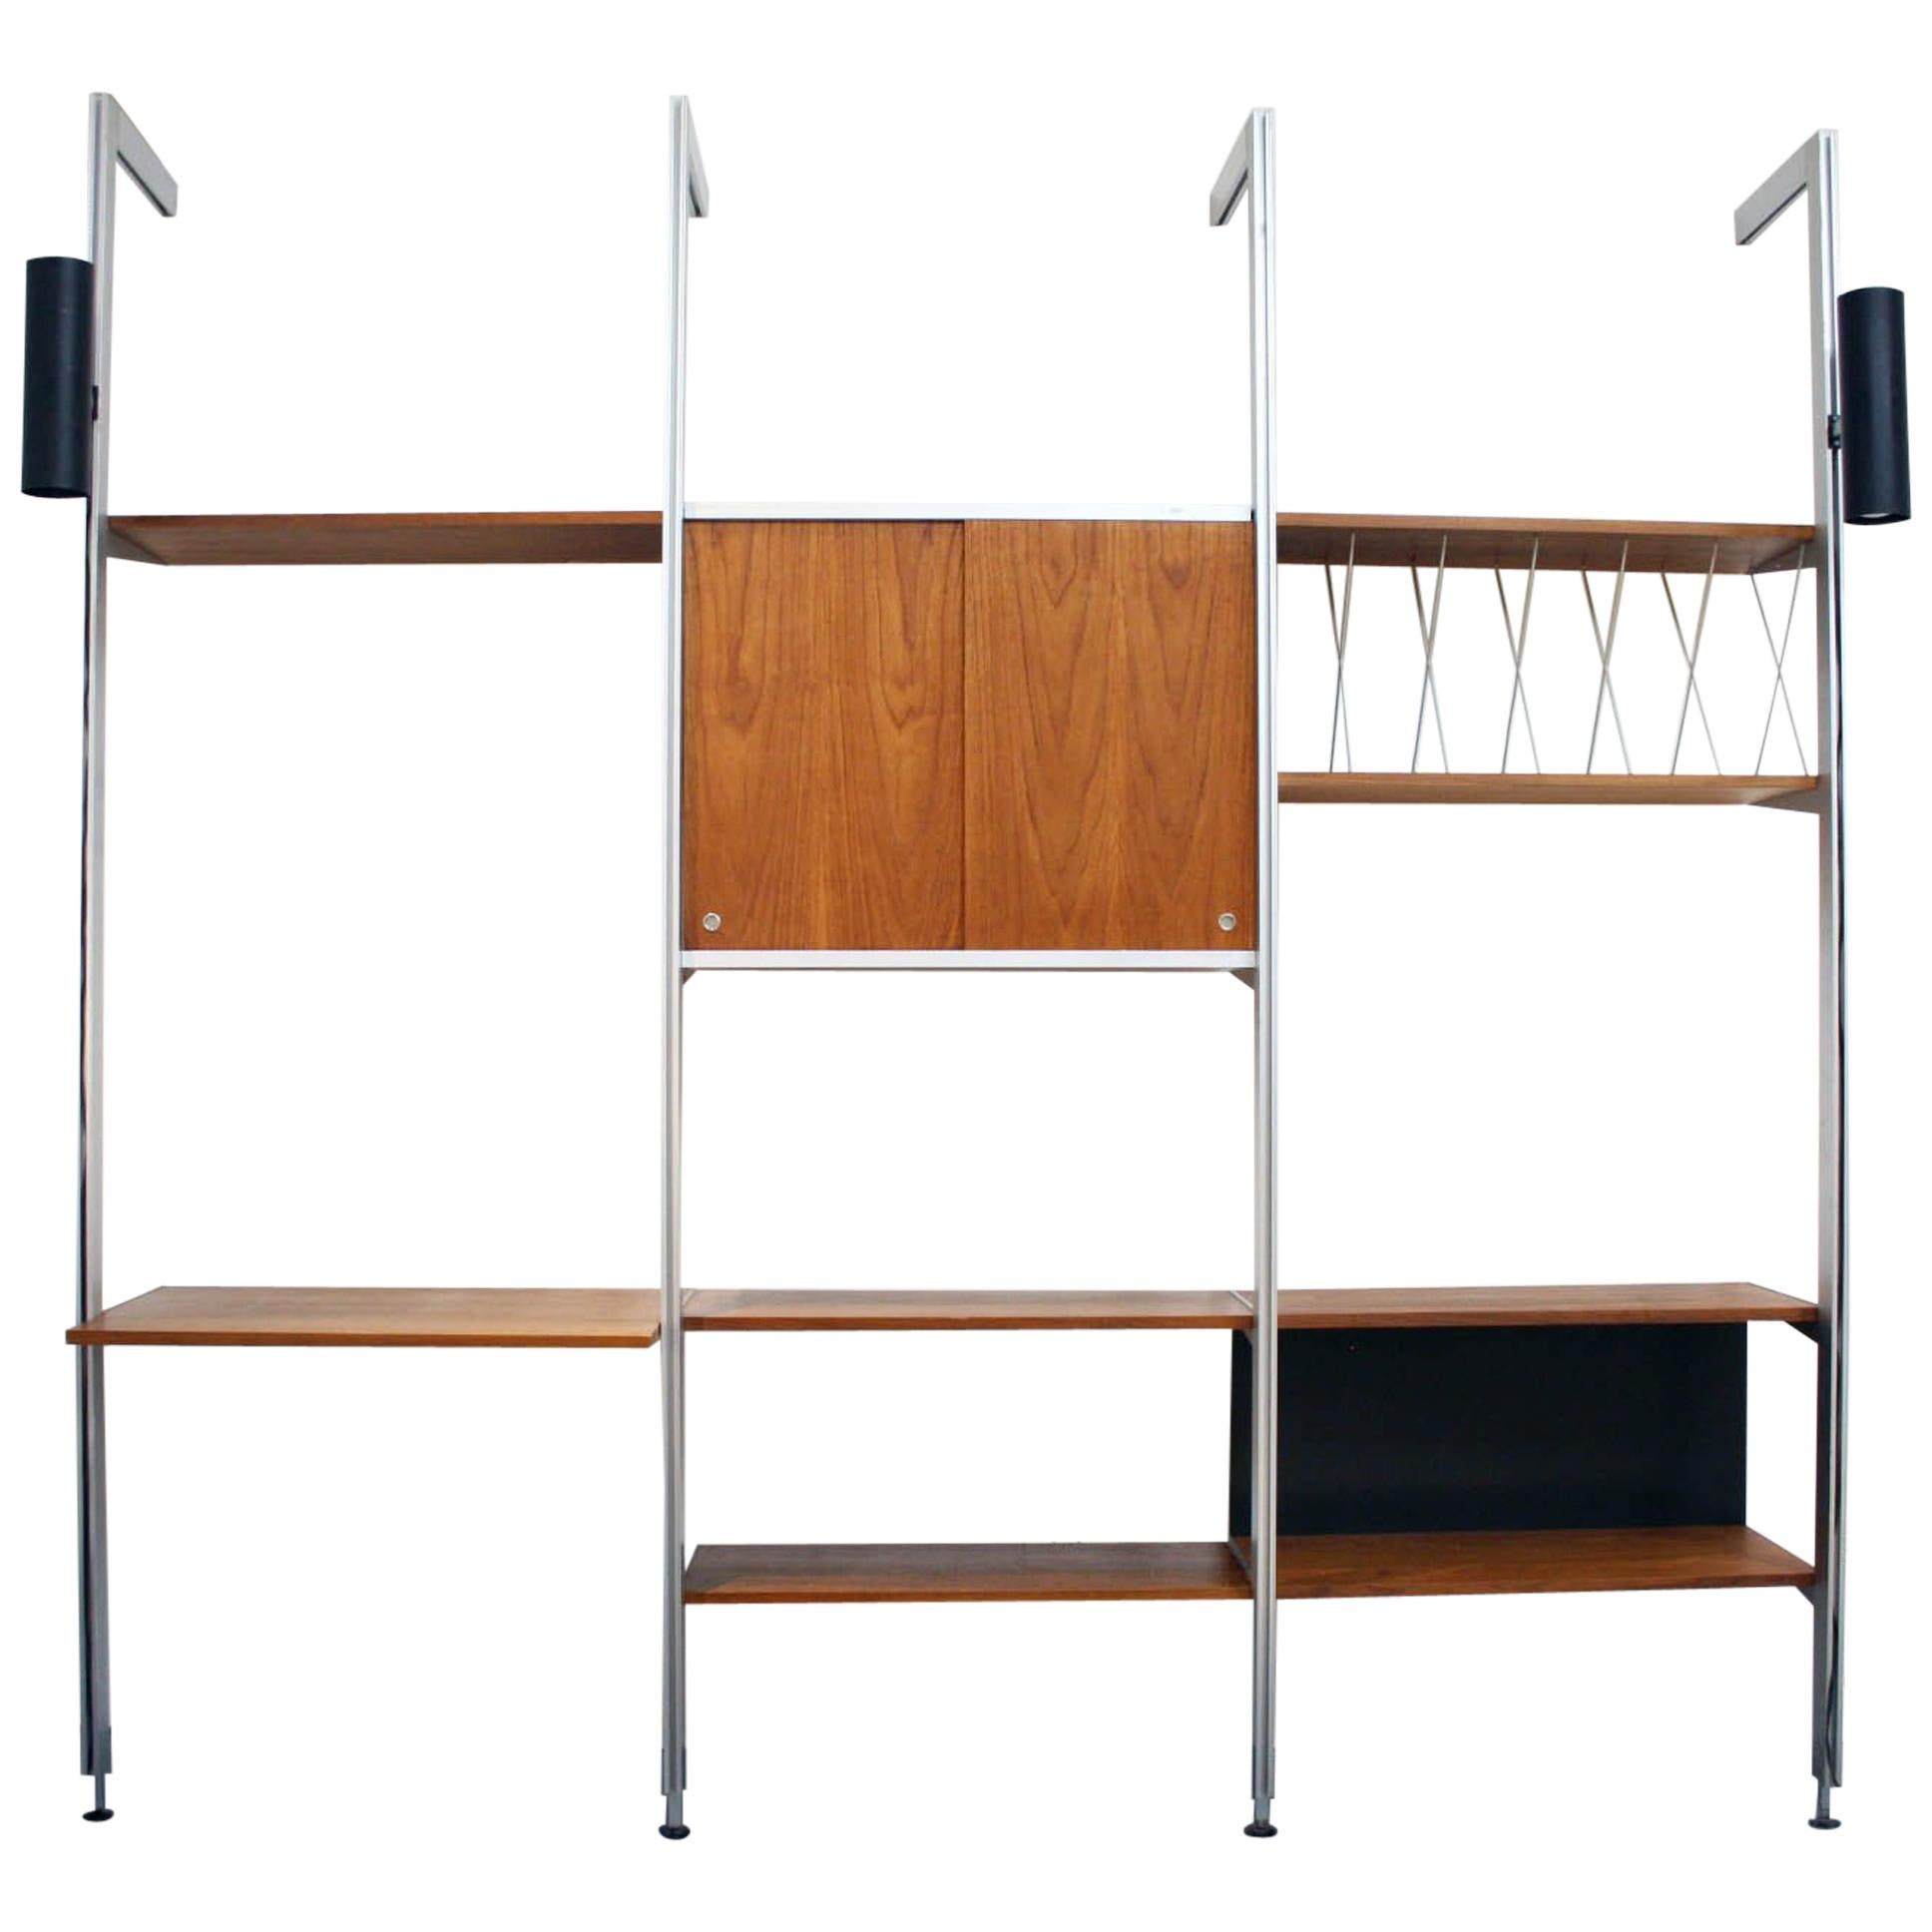 Original CSS 'Comprehensive Storage System' by George Nelson for Herman Miller